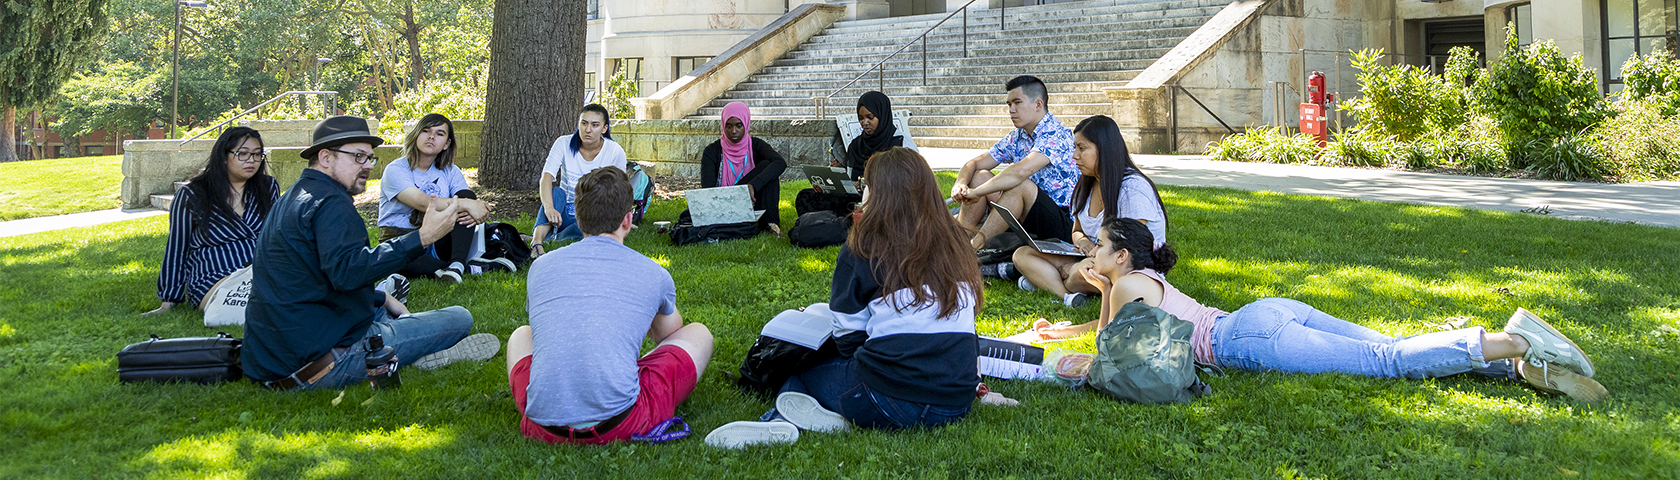 group of students sitting on lawn in circle with teacher